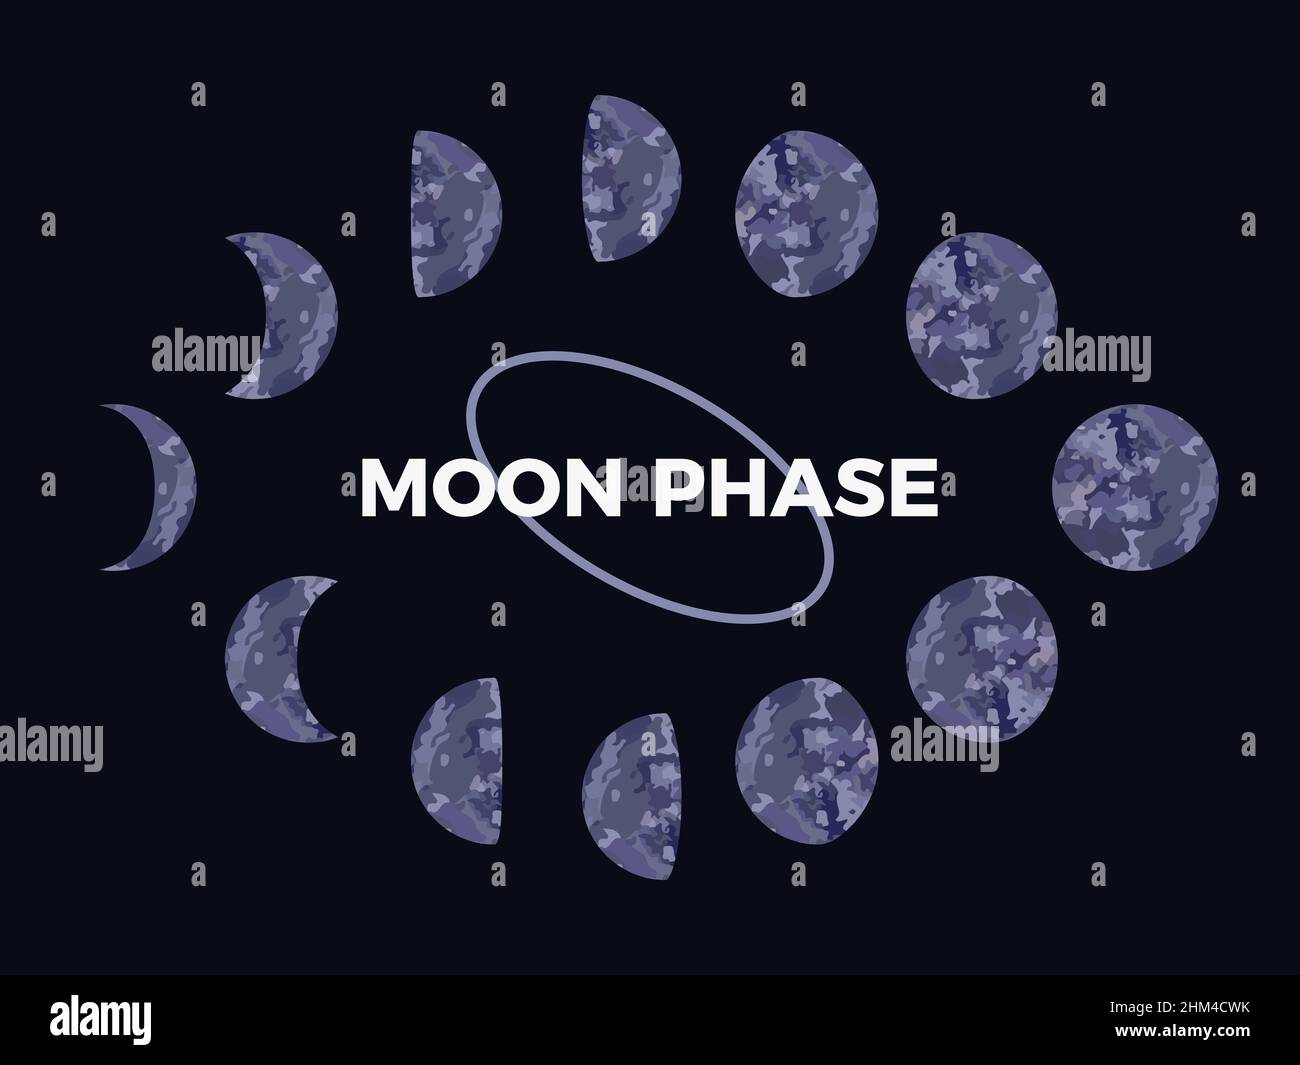 Moon phase. Textured surface of the moon. Lunar phases throughout